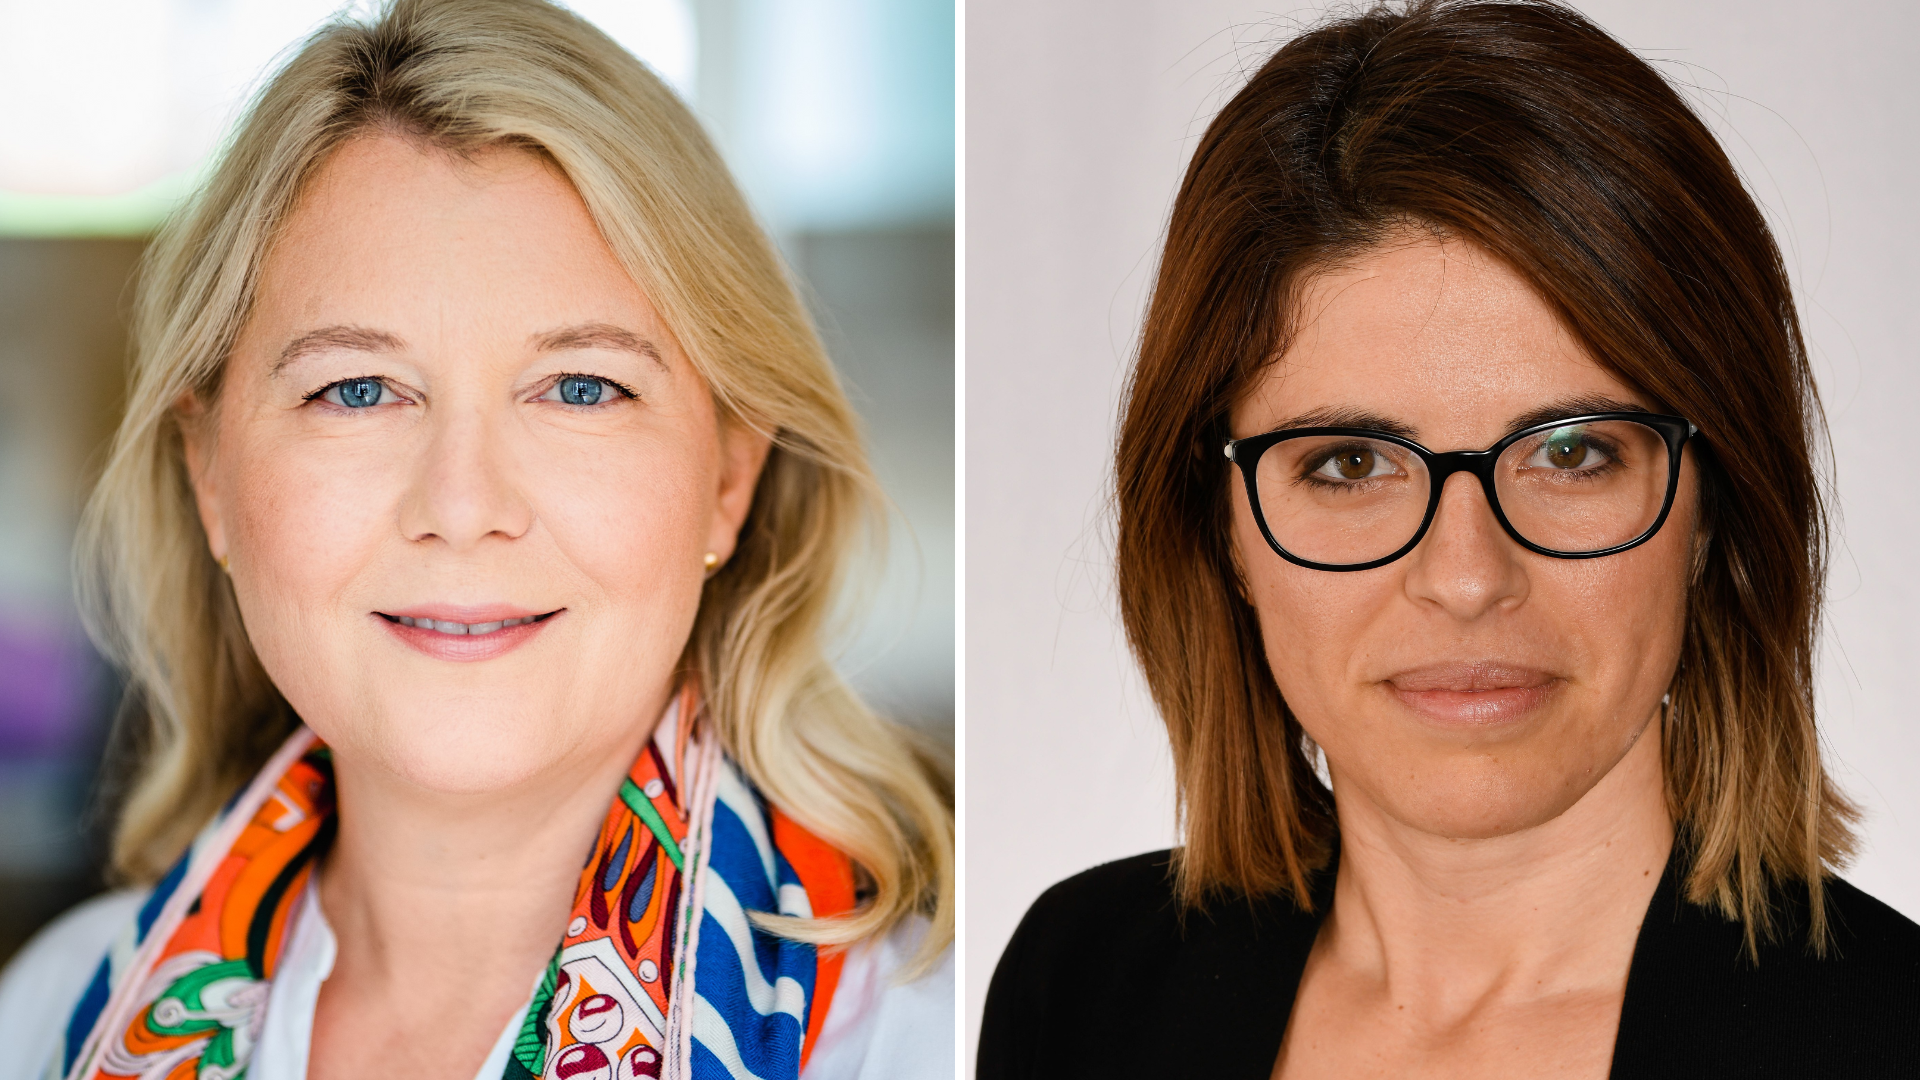 Petra Jantzer, PhD, Senior Managing Director and Global Life Sciences Lead, Accenture_Selen Karaca-Griffin, Senior Principal and Global Life Sciences Research Lead, Accenture_Combined 16x9 Headshot